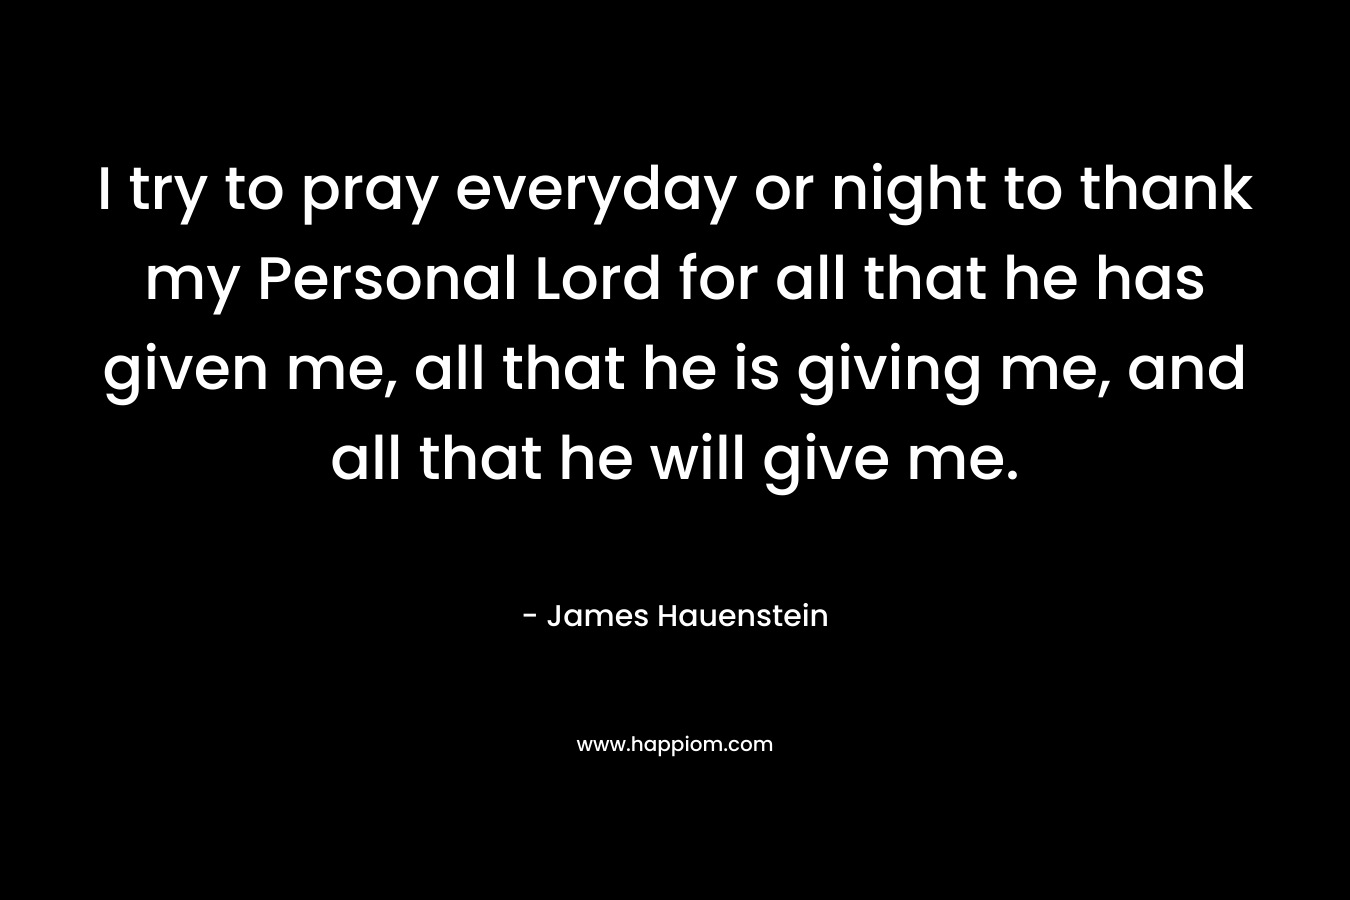 I try to pray everyday or night to thank my Personal Lord for all that he has given me, all that he is giving me, and all that he will give me. – James Hauenstein